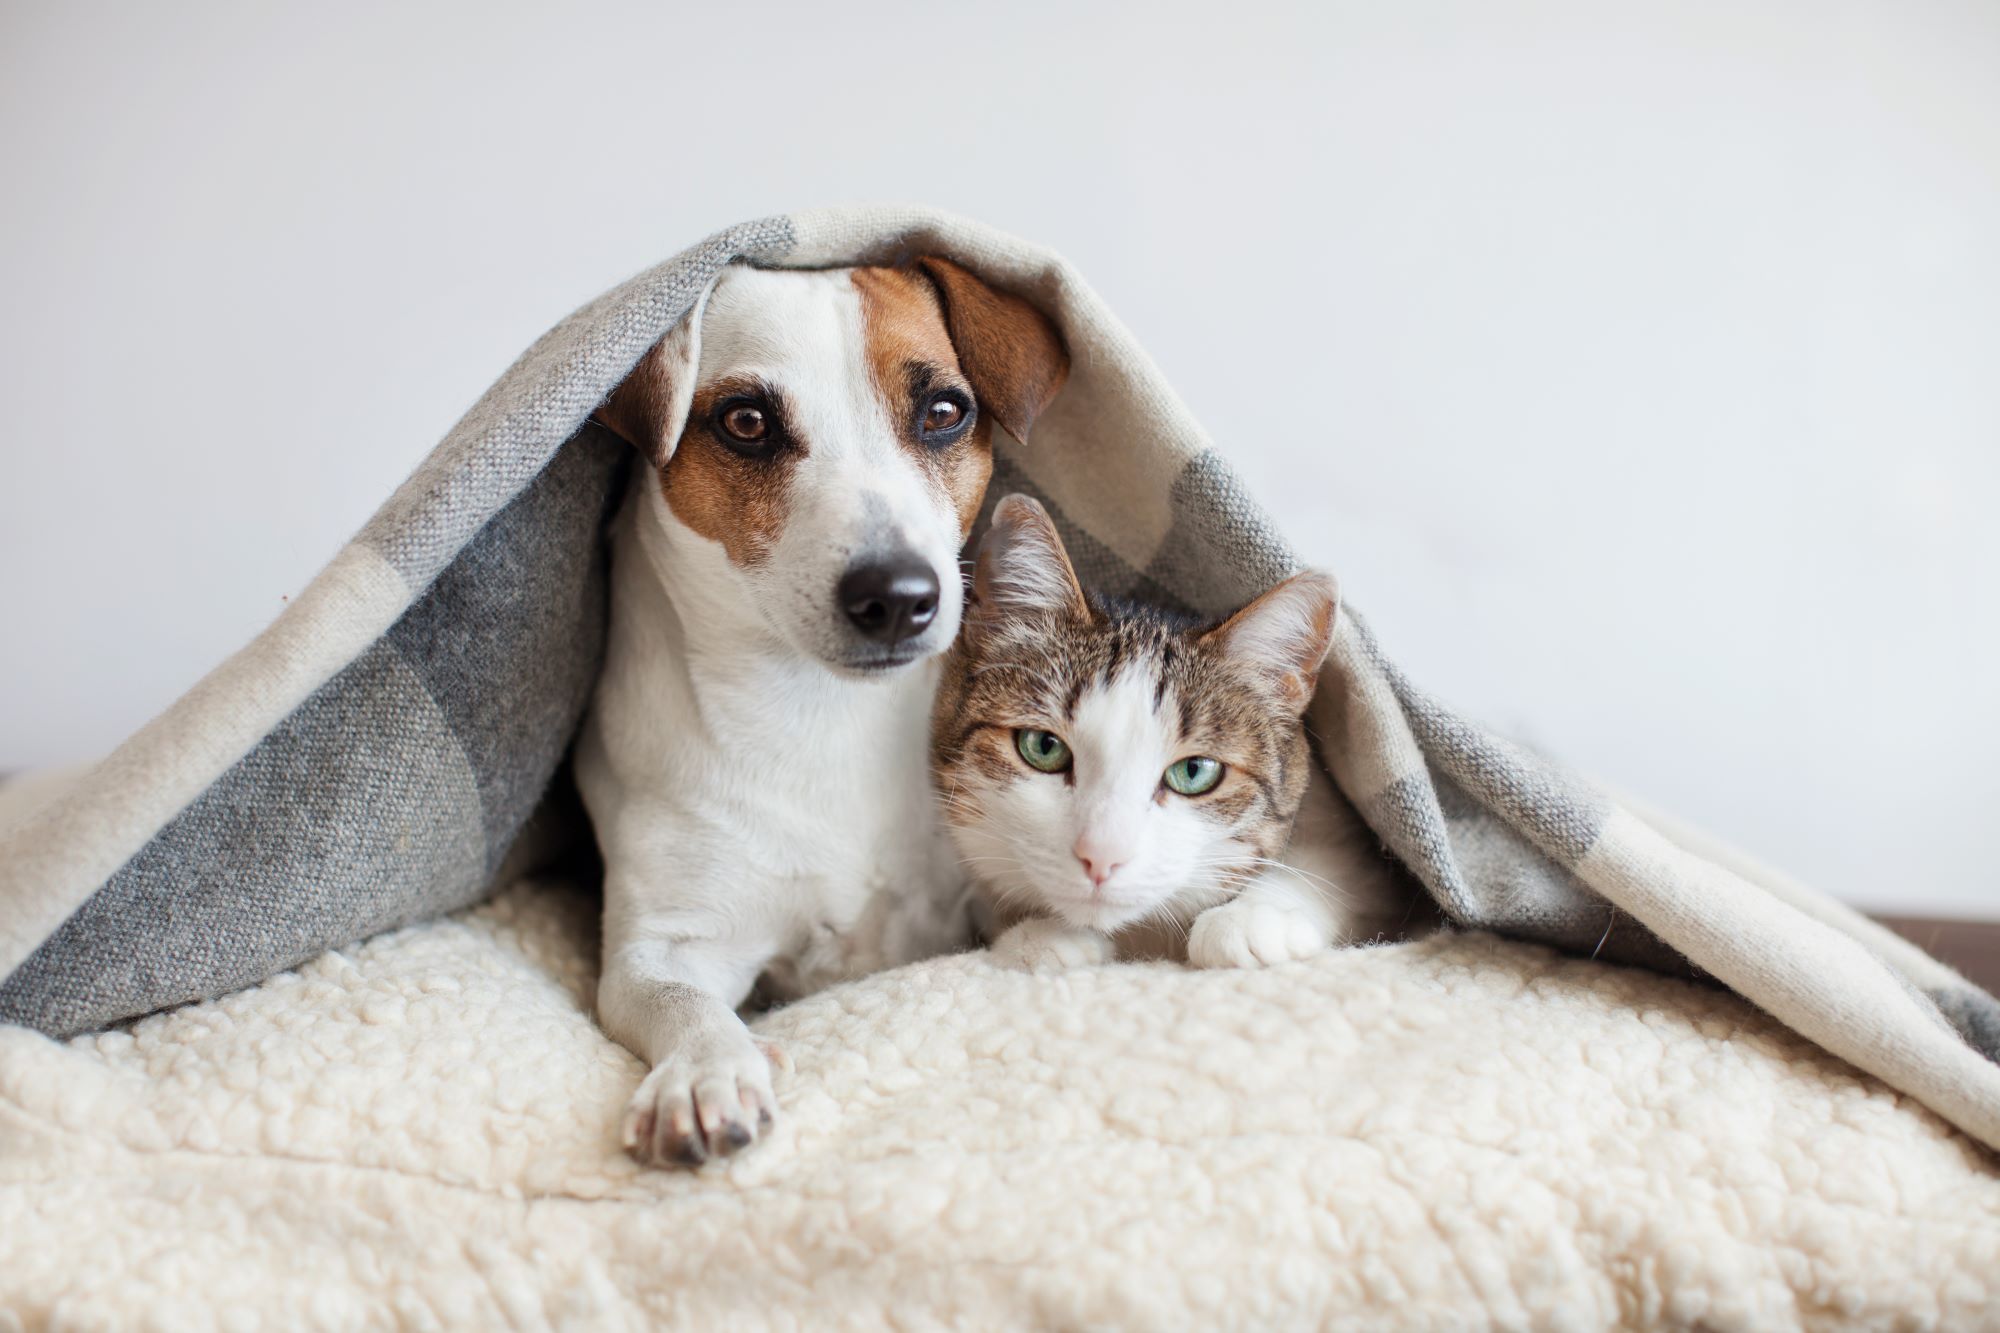 11 Tips to Keep Your Pets Safe During the Holidays